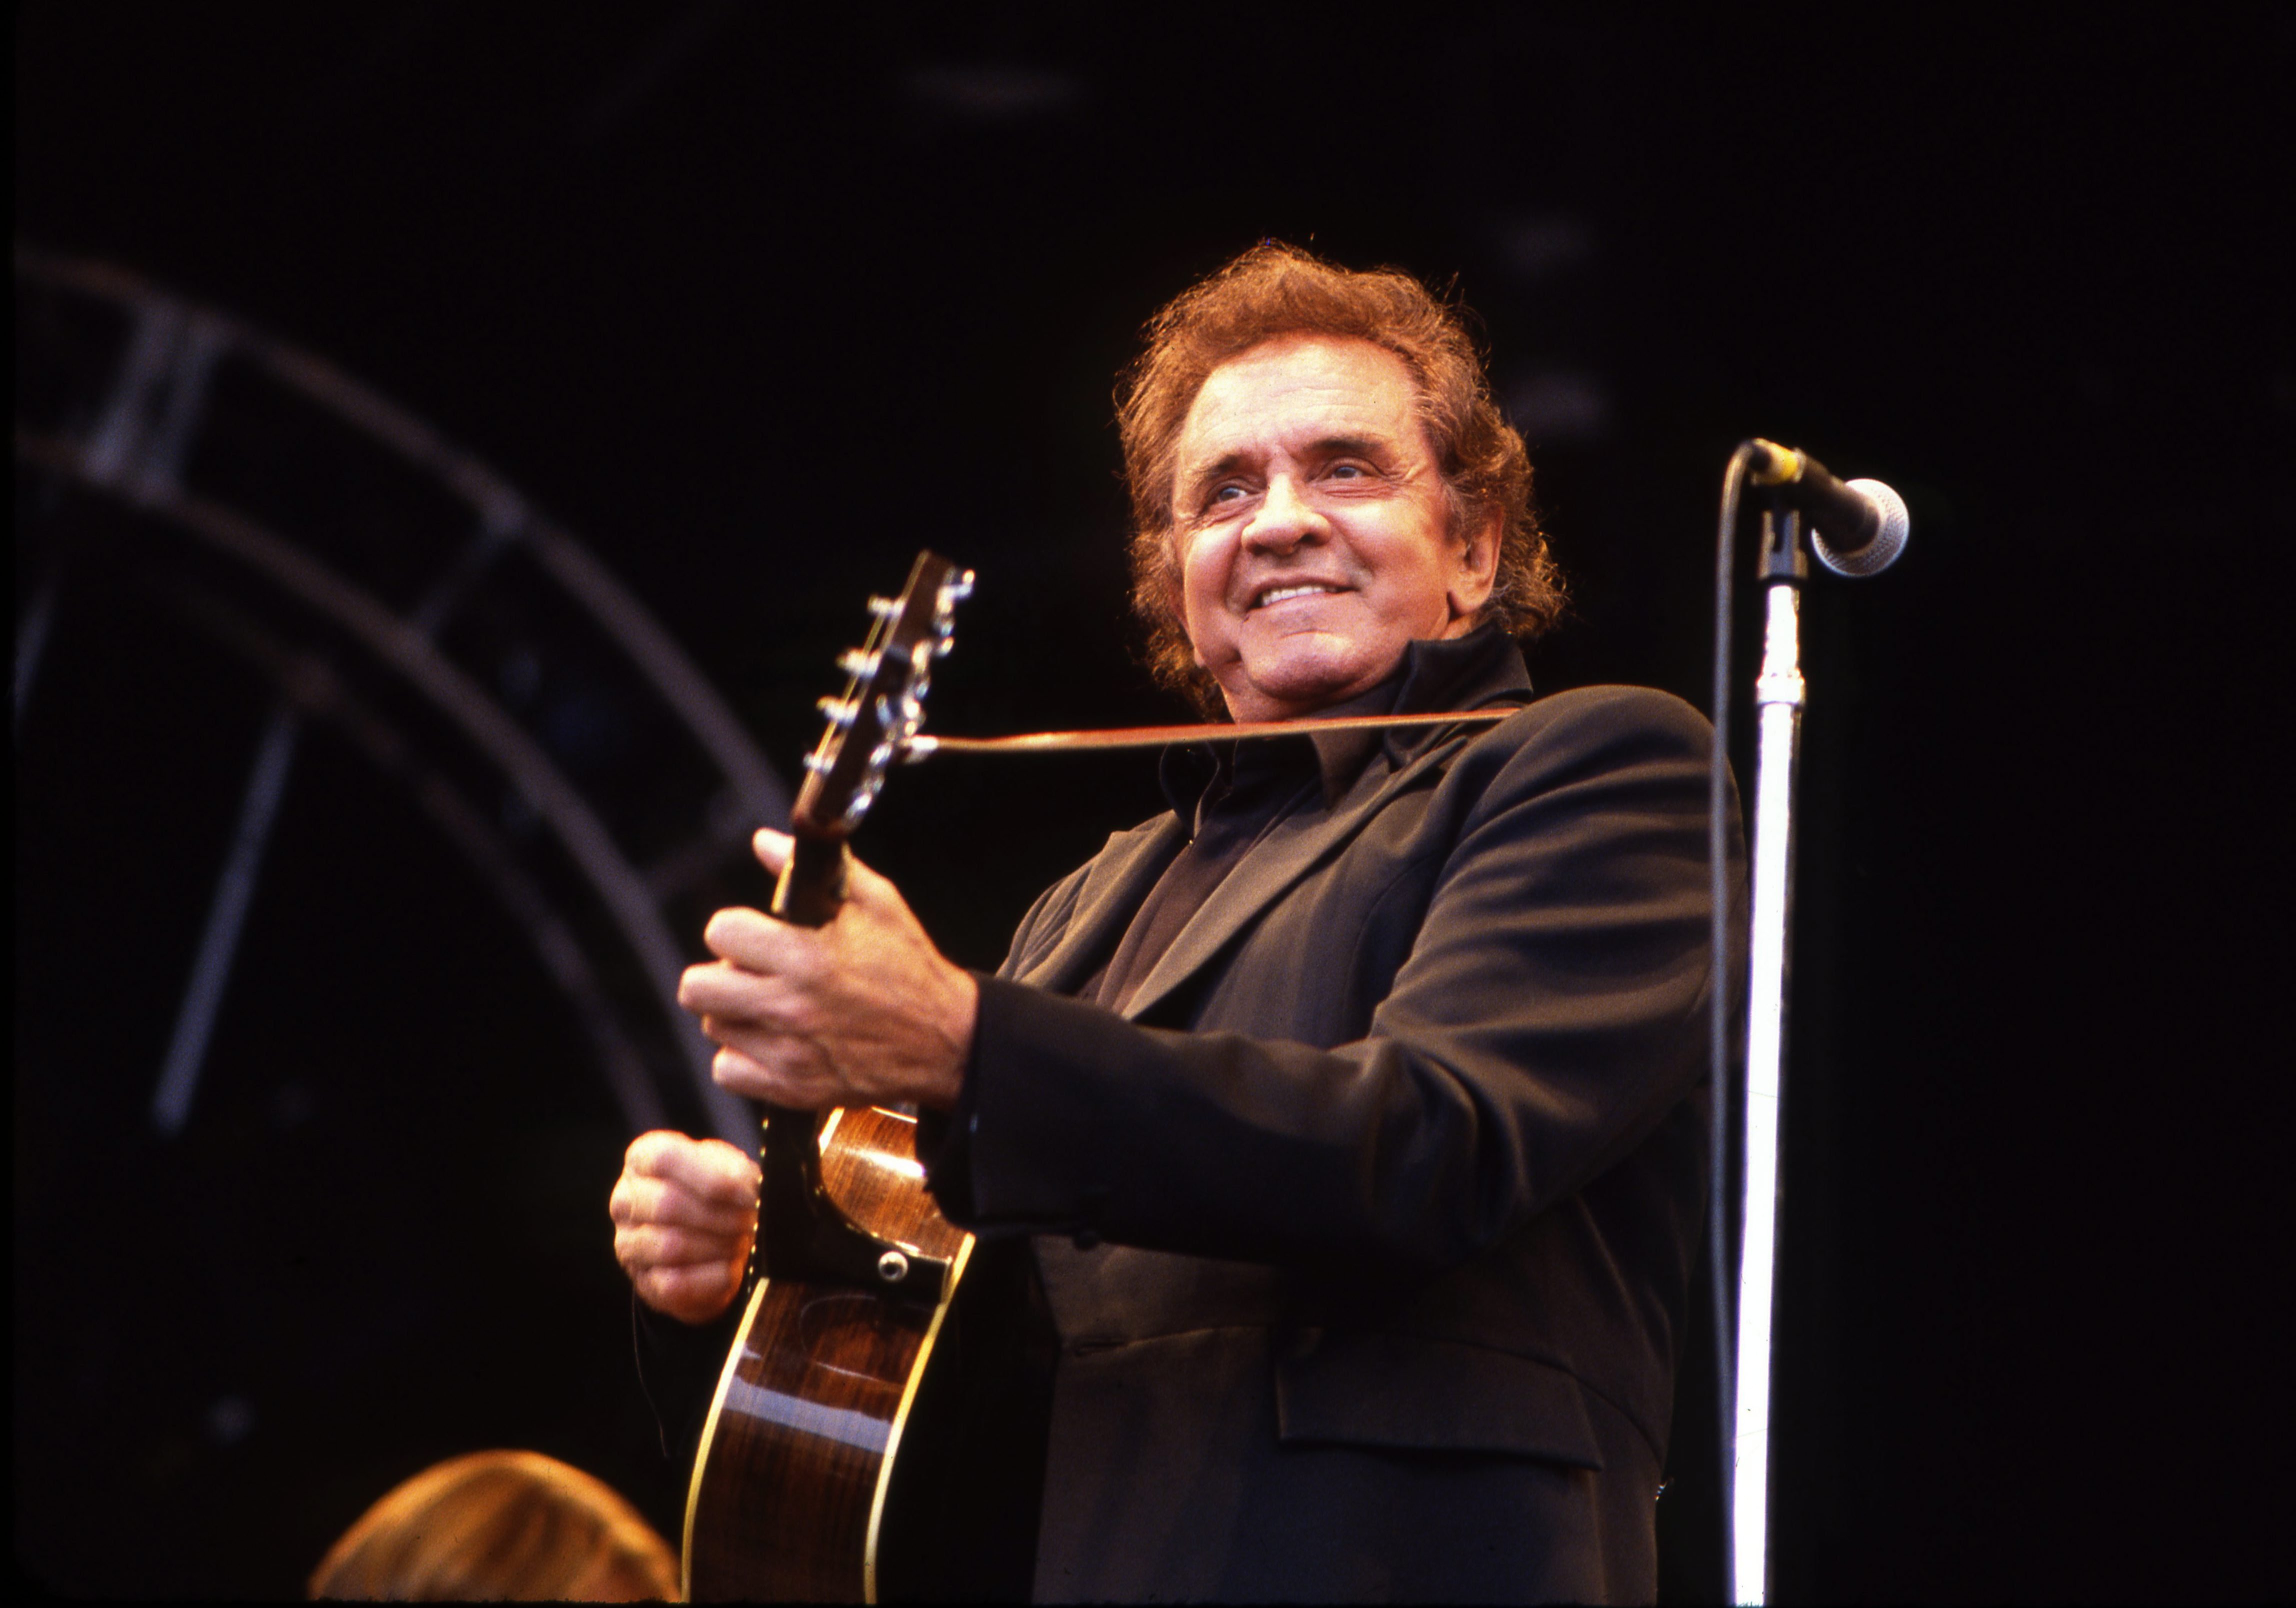 Johnny Cash performs at the Glastonbury Festival in 1994 | Photo: Getty Images